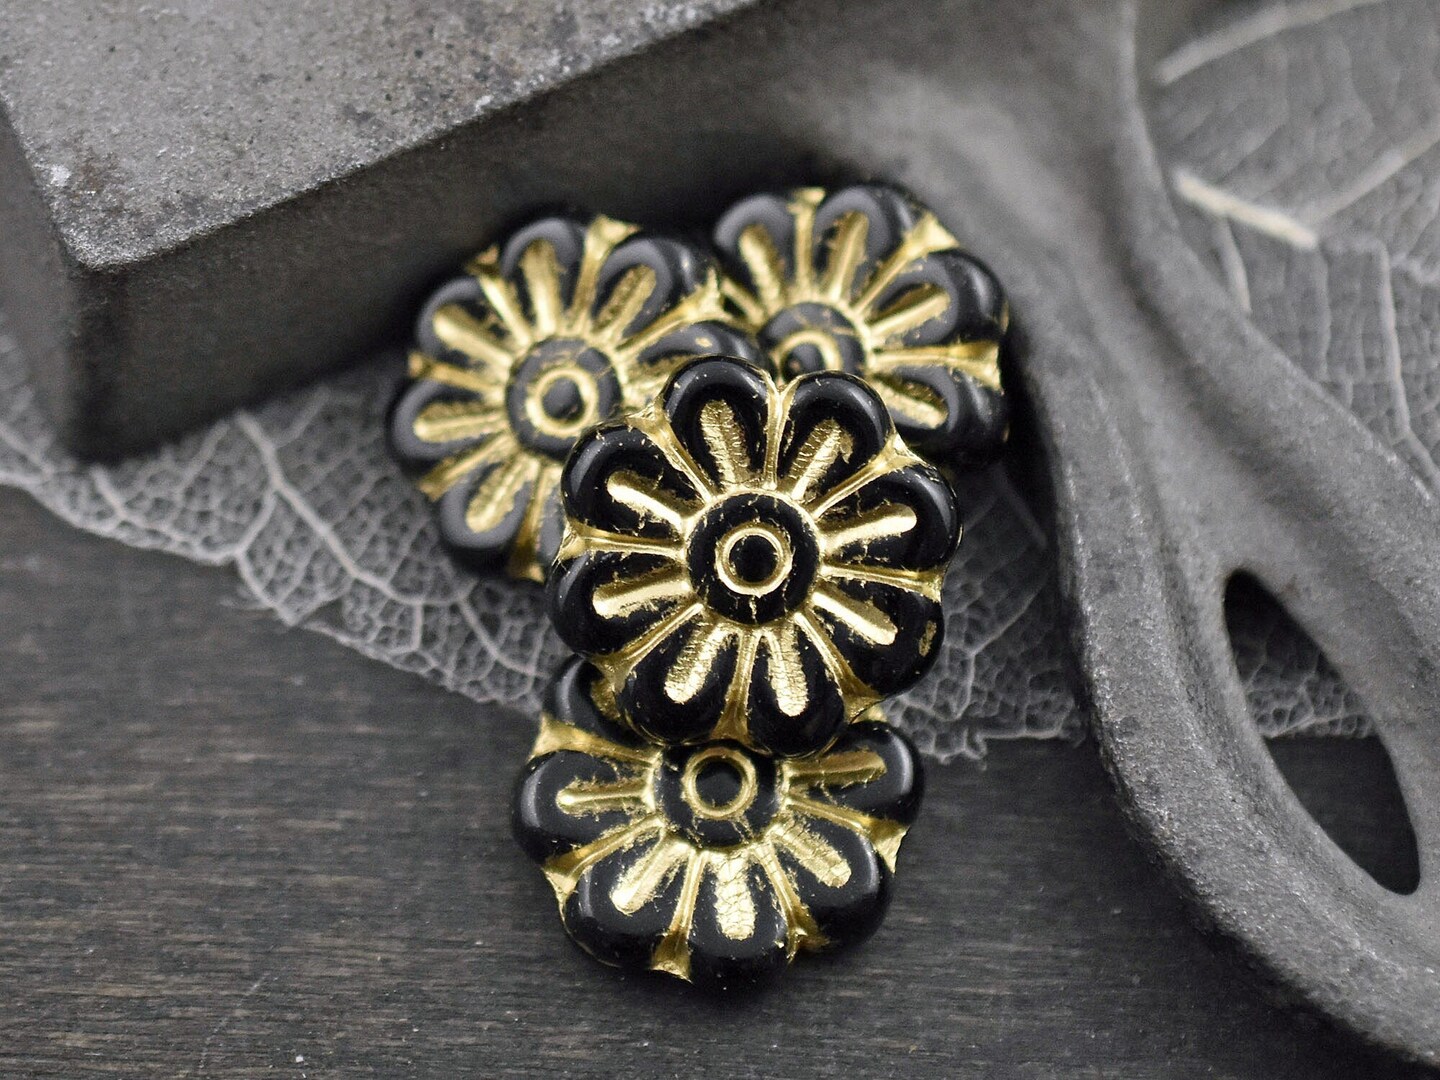 *6* 18mm Gold Washed Opaque Black Daisy Flower Beads